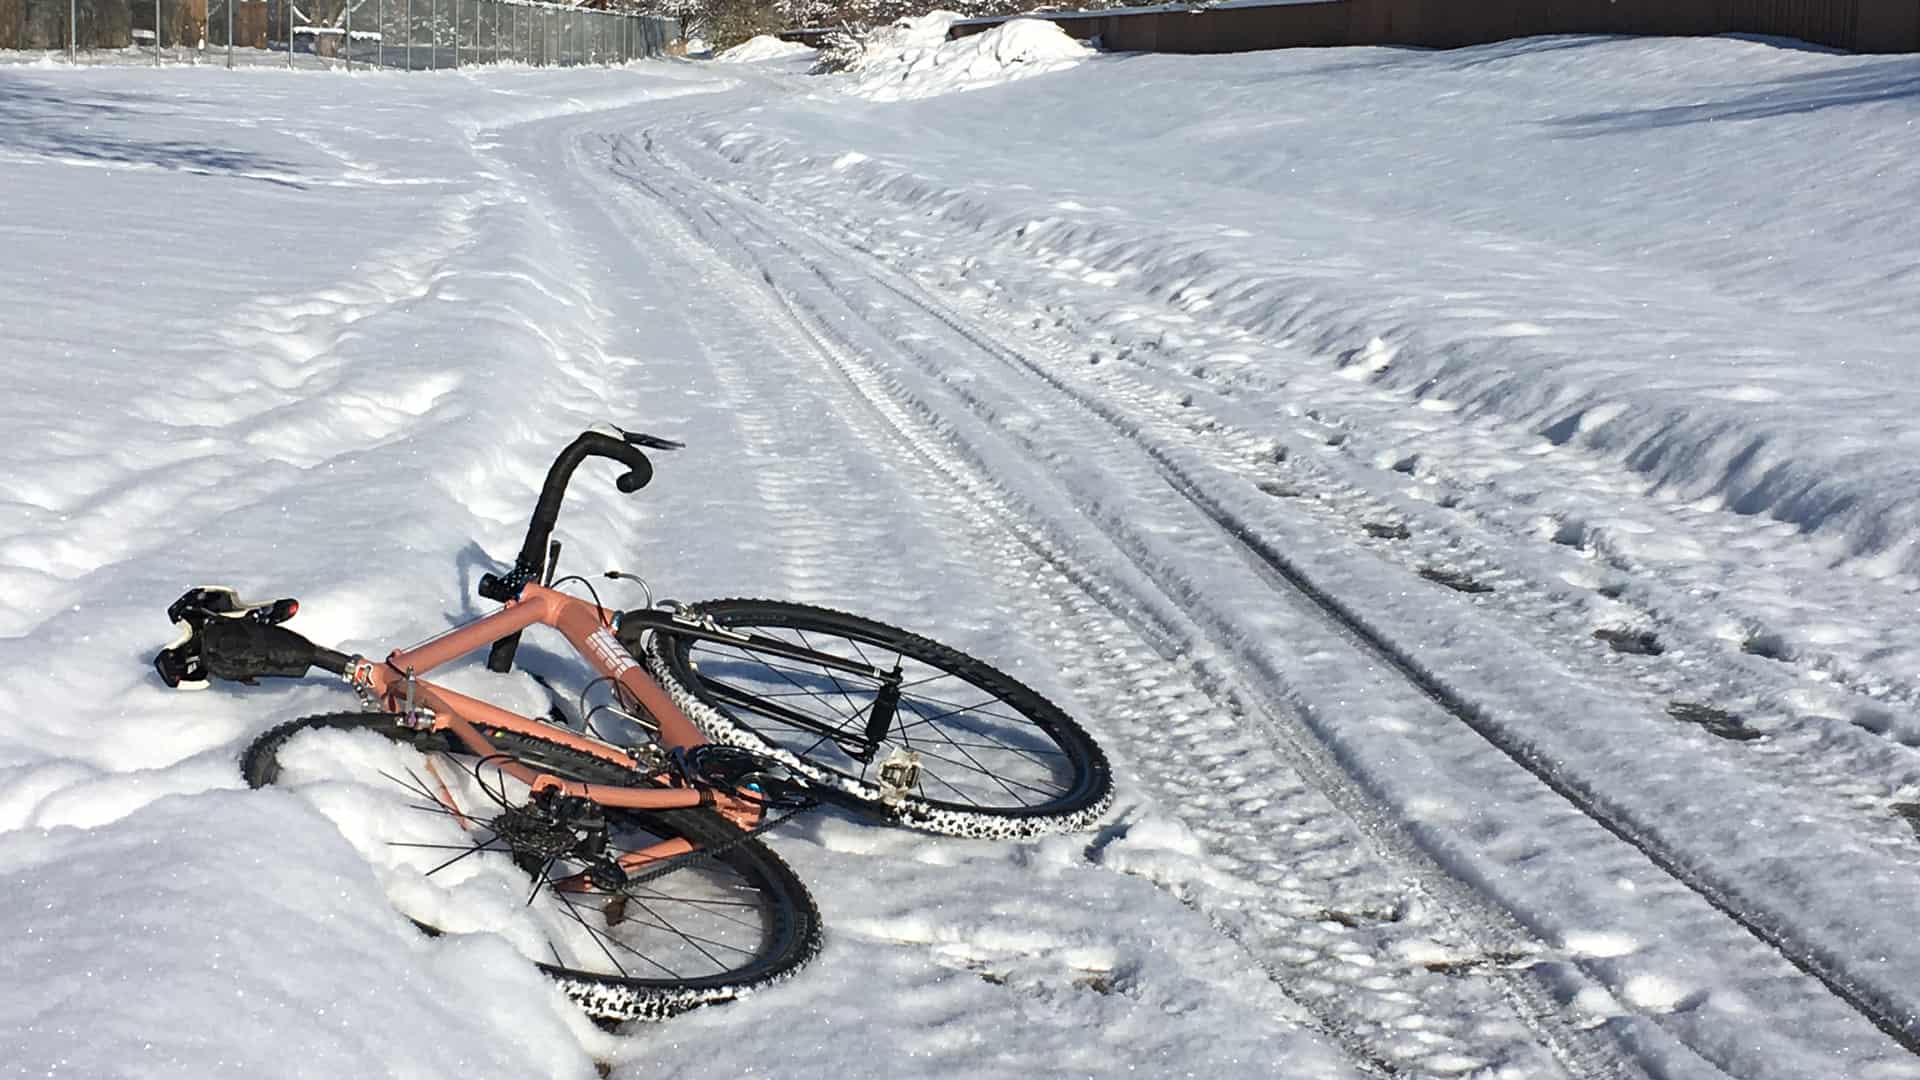 HOW TO: Ride, Race and Train Your Way Through a Cold